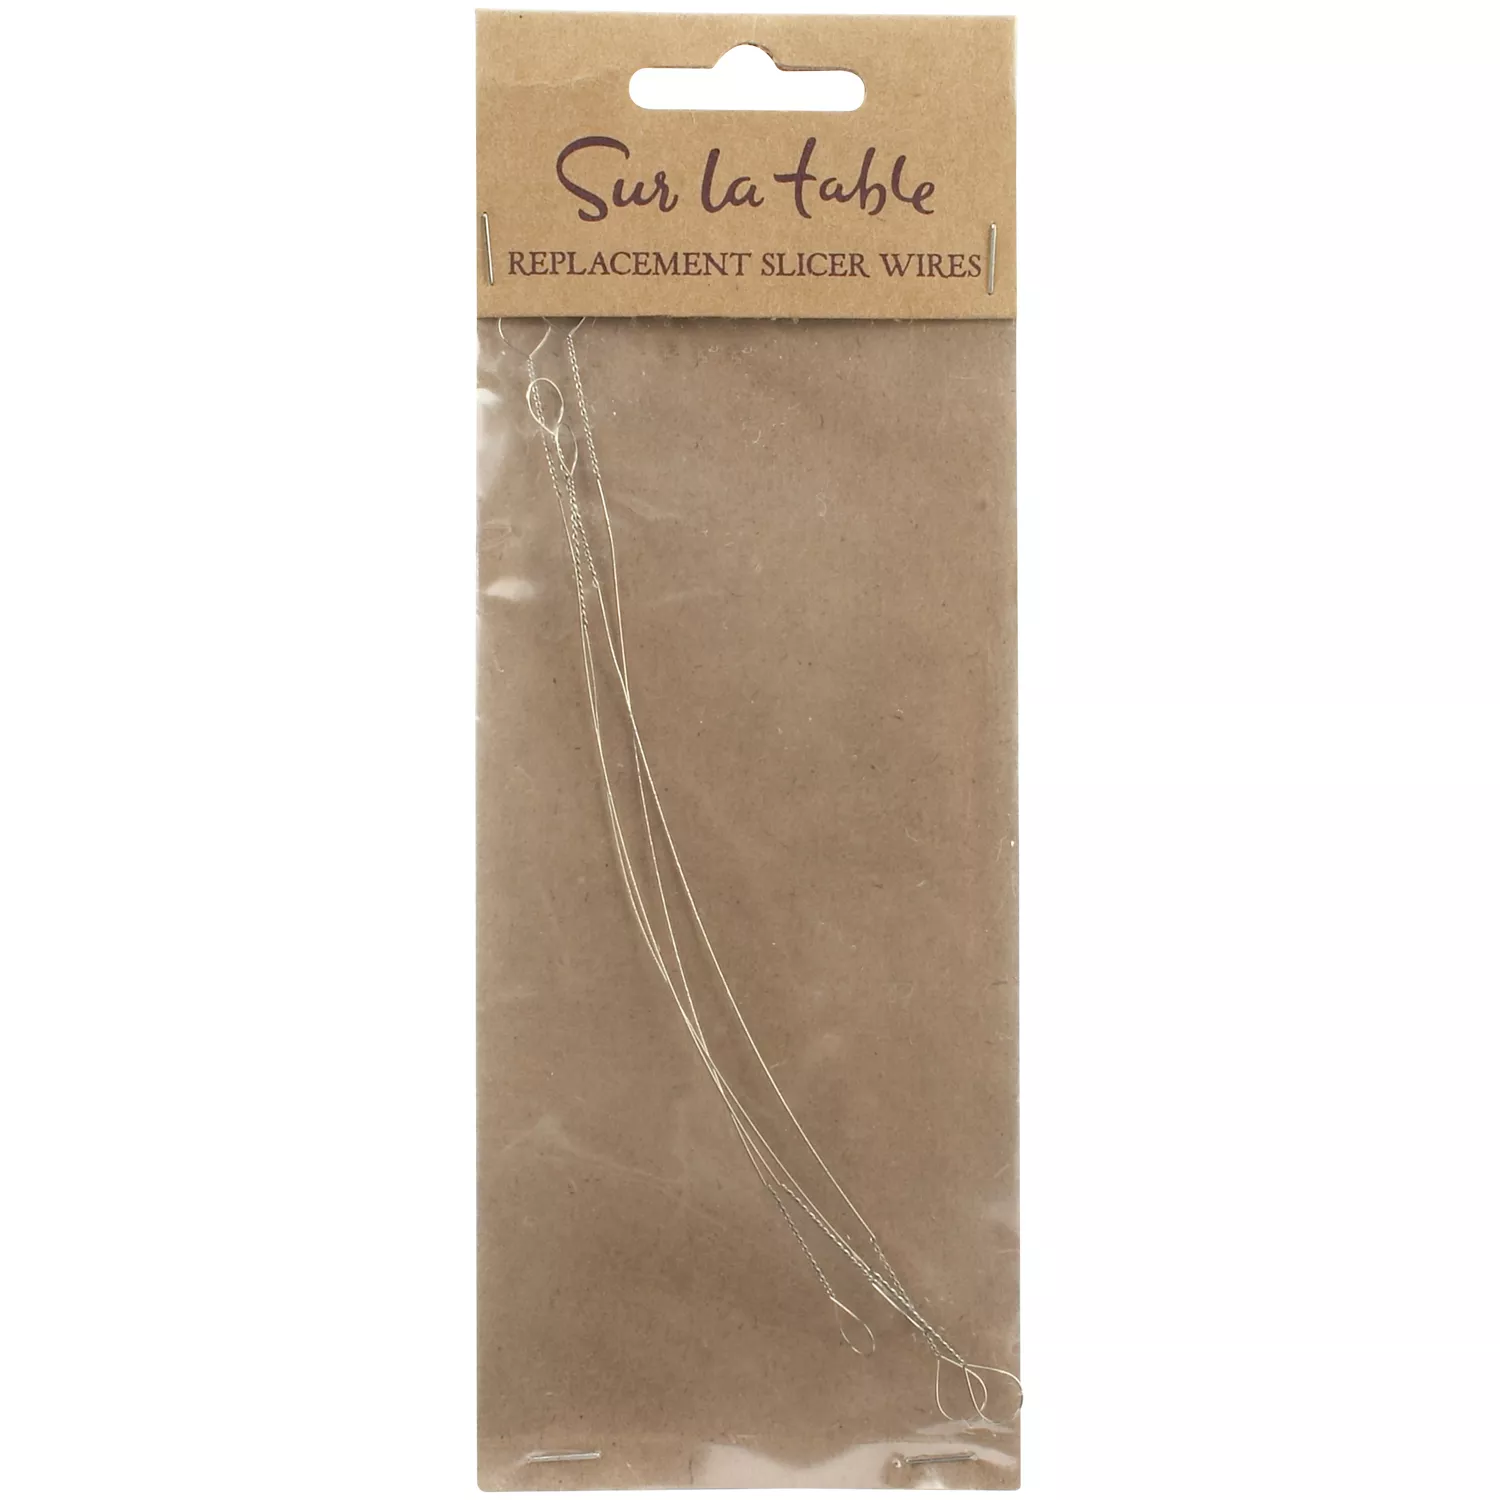 Sur La Table Replacement Cheese-Slicer Wires, Set of 4